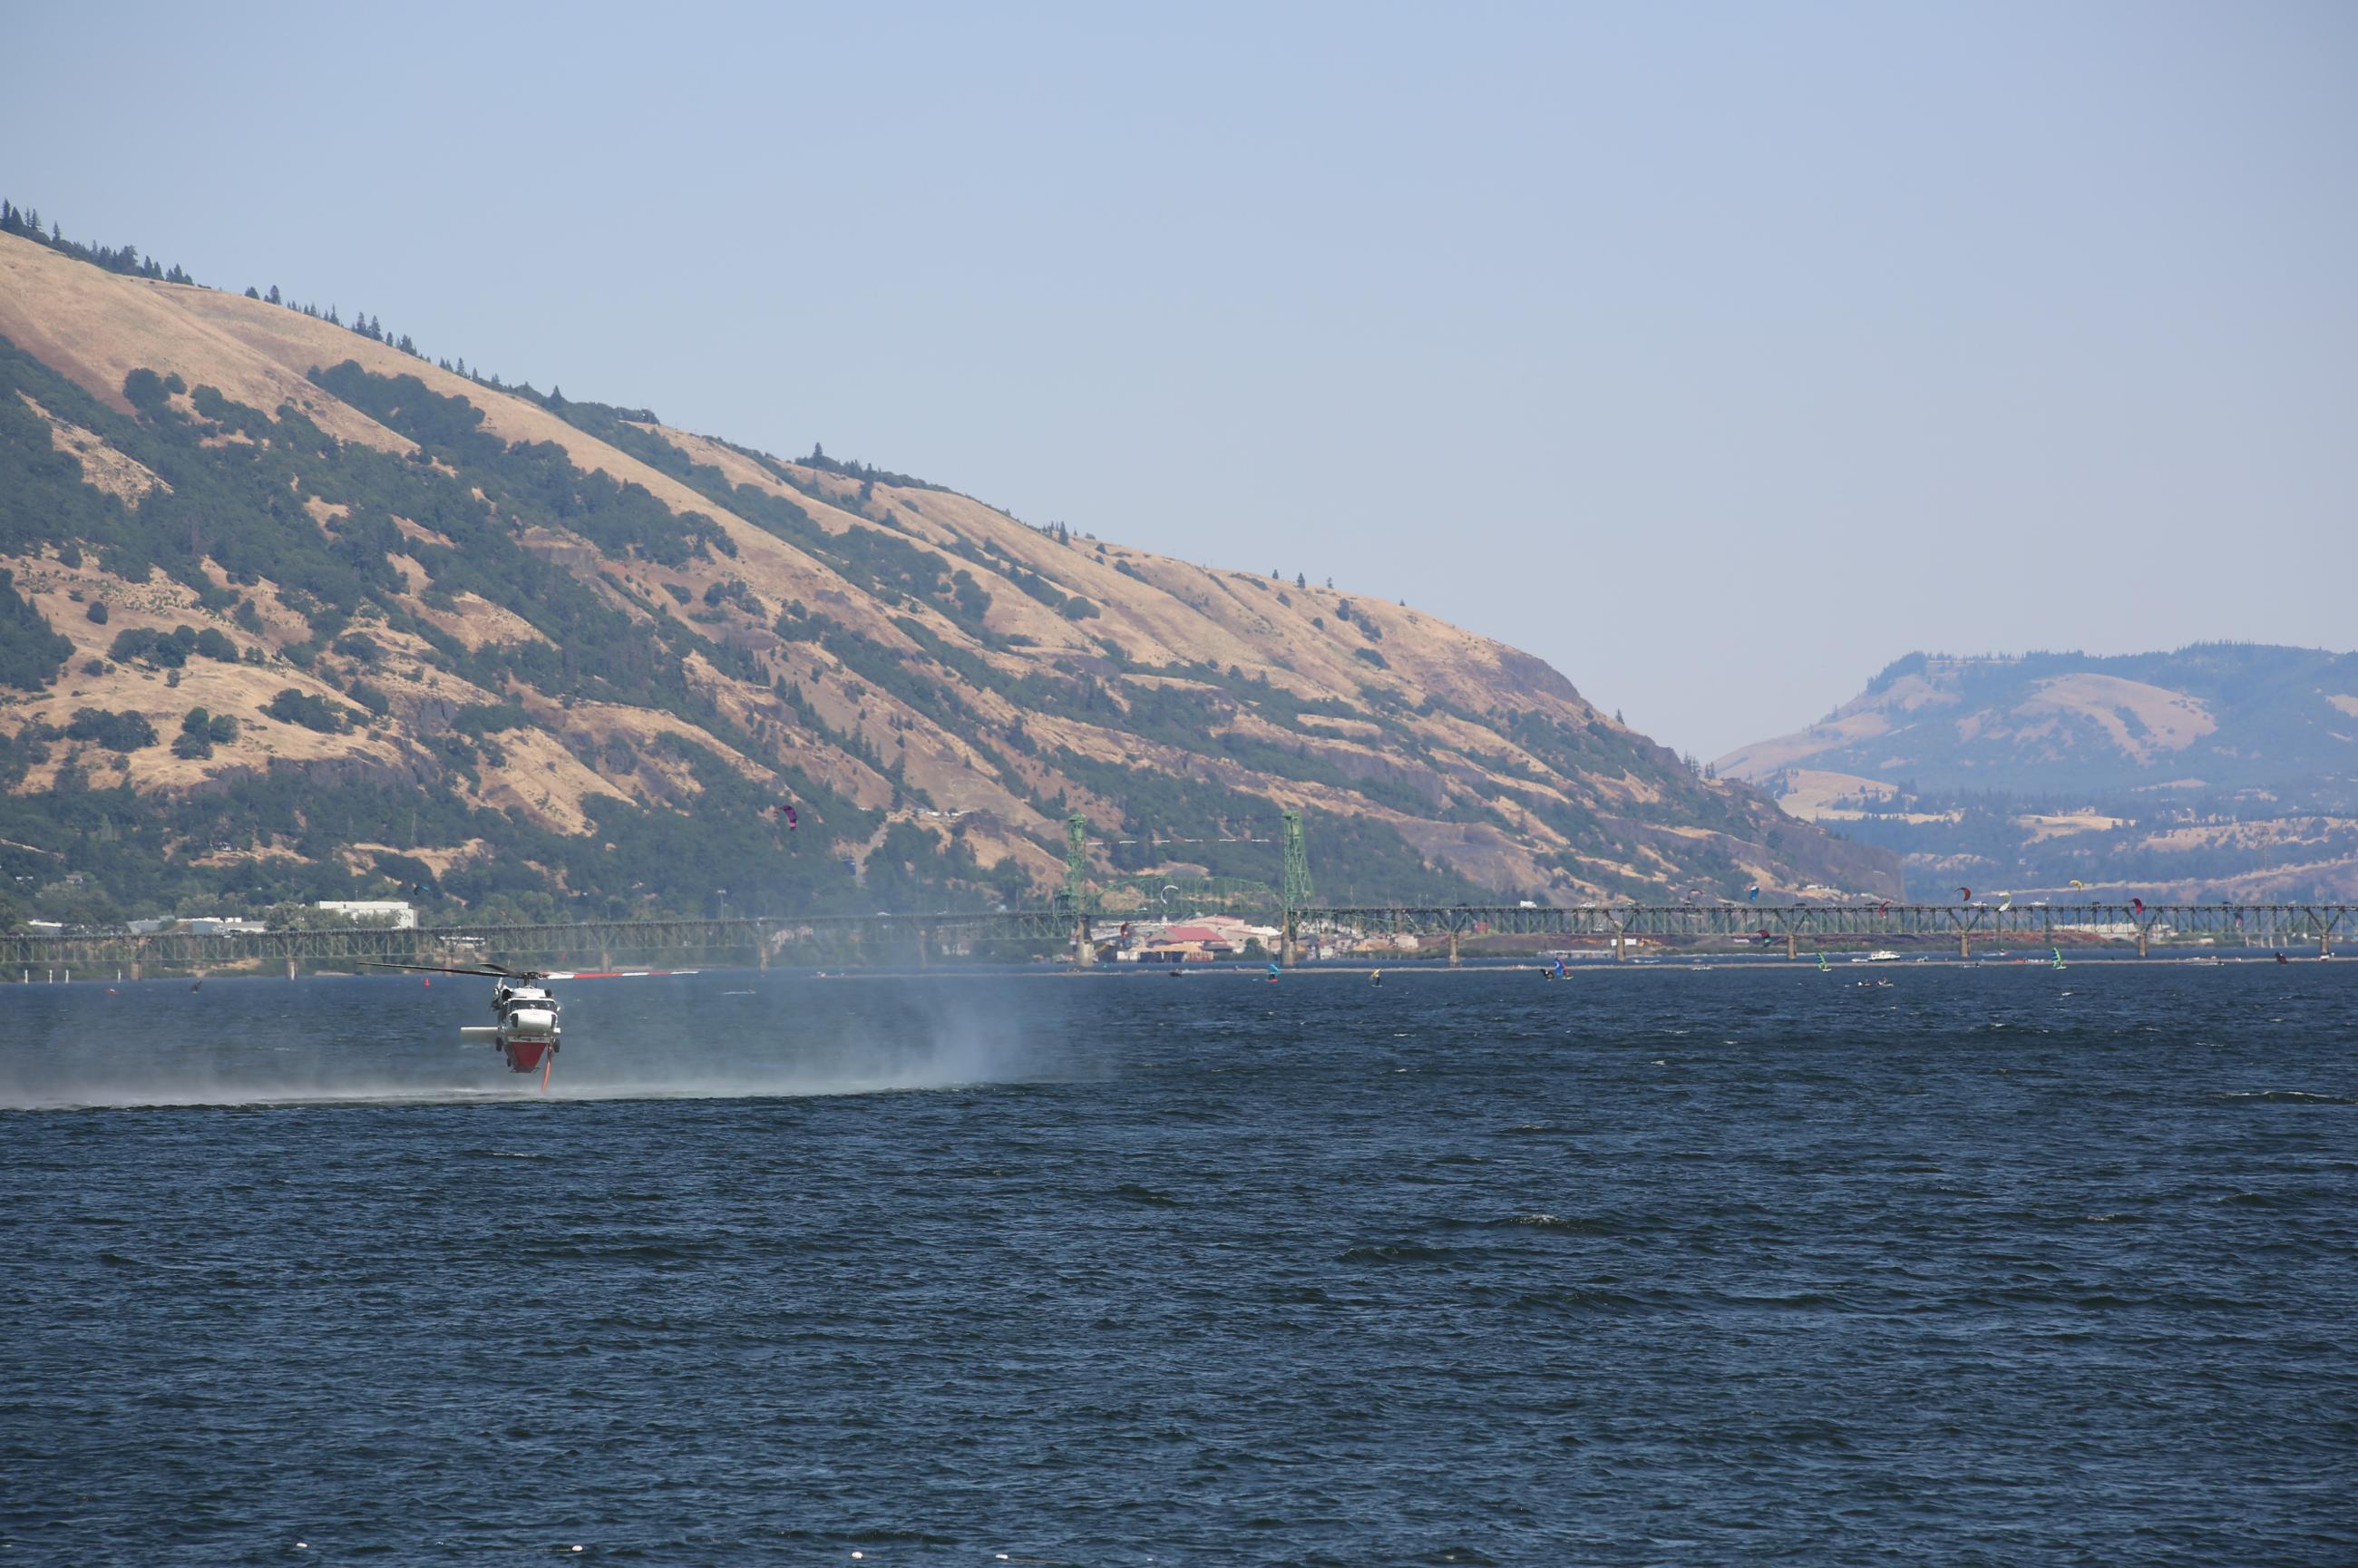 Helicopter dipping for water in the Columbia River.